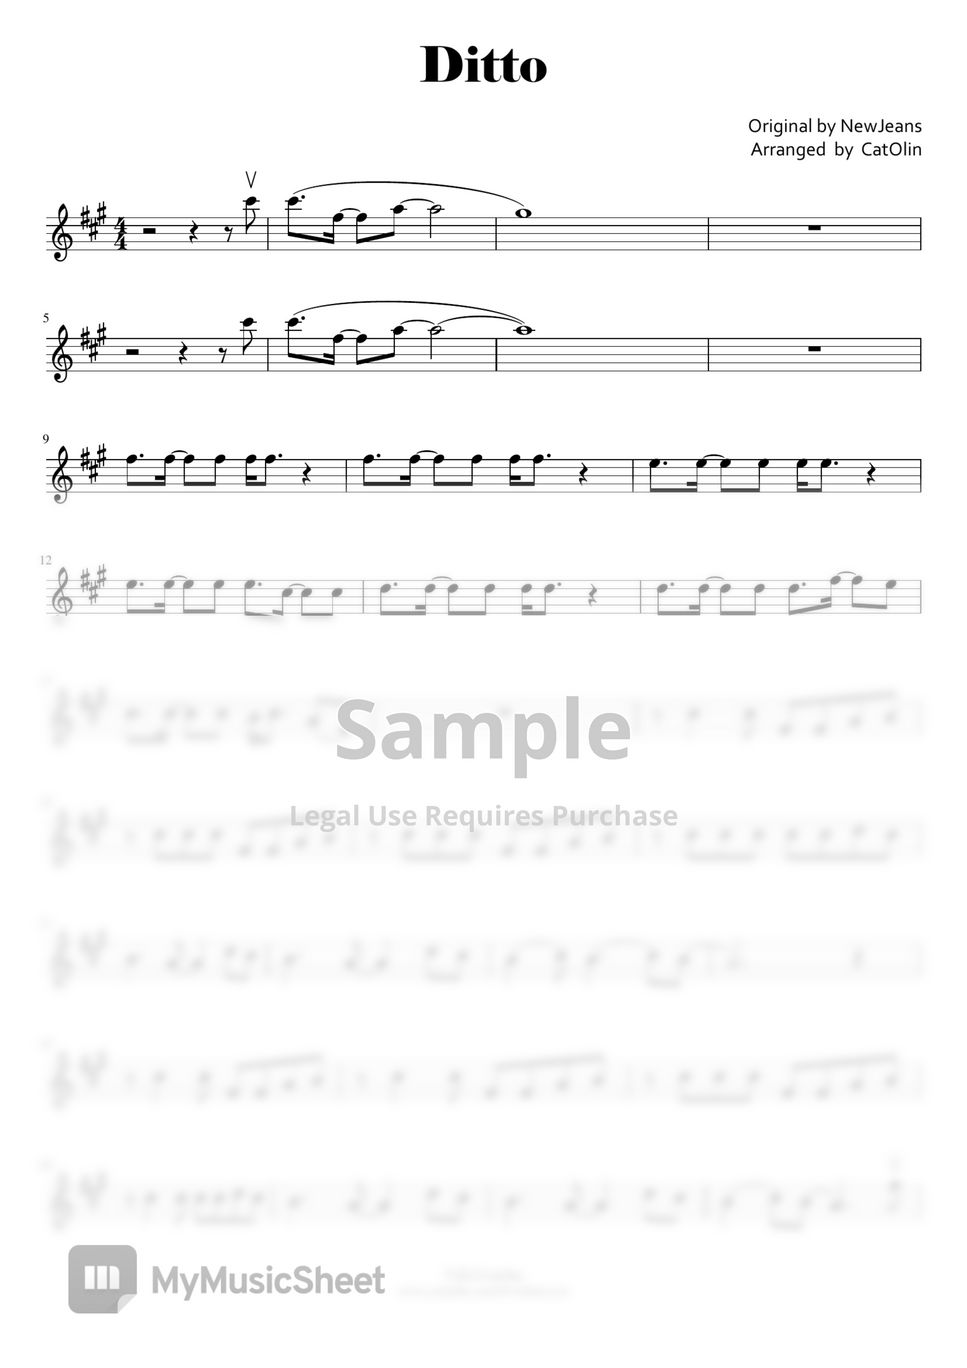 Ditto – New Jeans (뉴진스) Sheet music for Piano (Solo